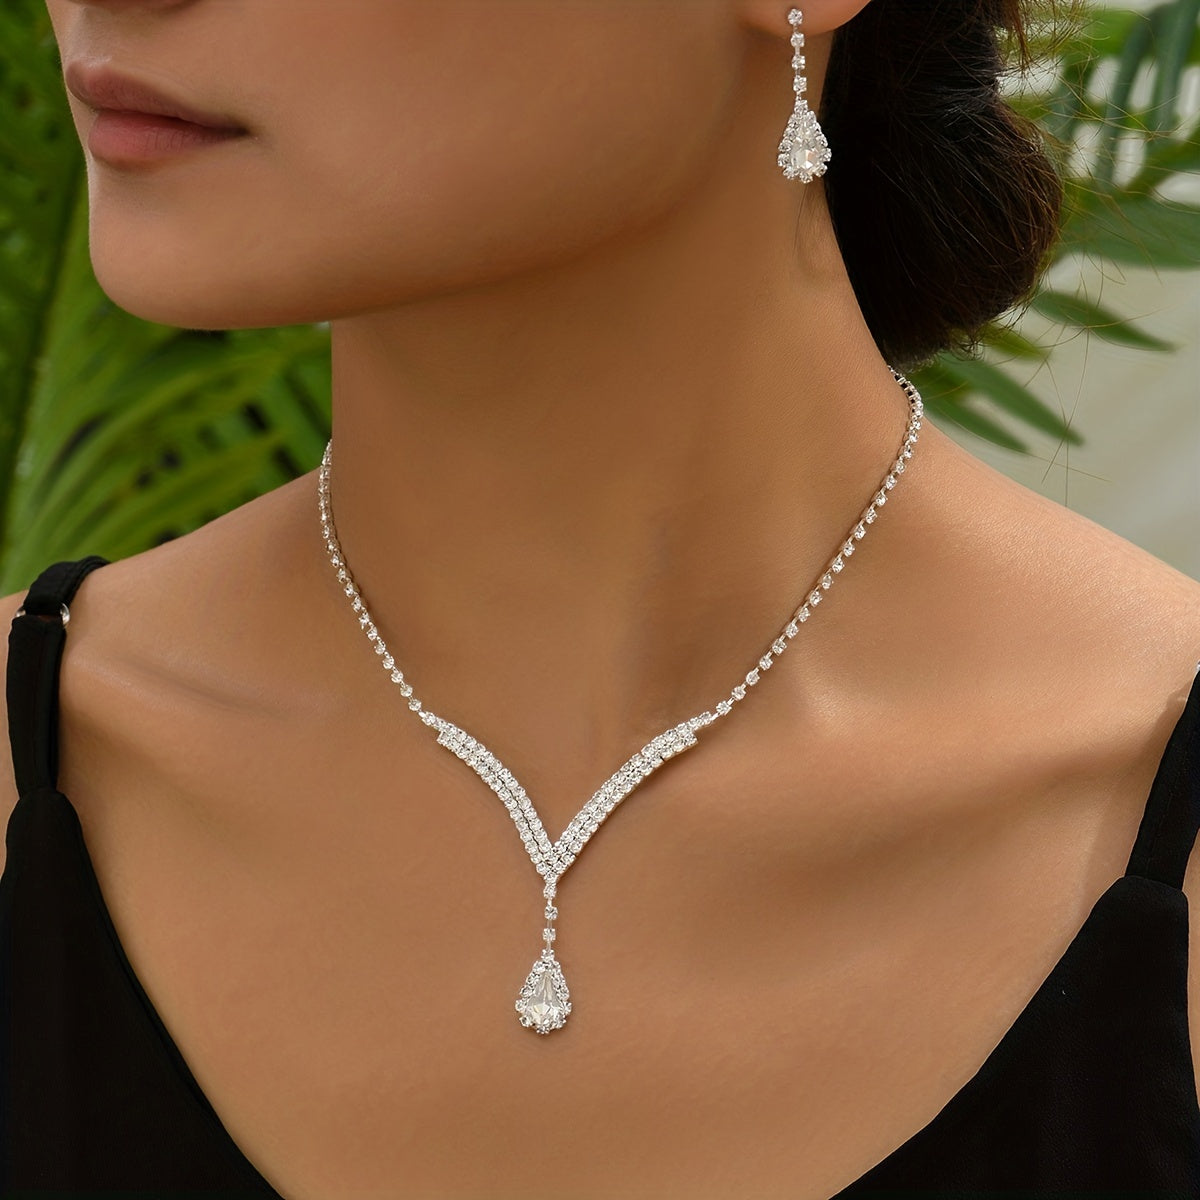 Elegant Water Drop Rhinestone Necklace and Earrings Set - Fine Jewelry for a Sophisticated Look